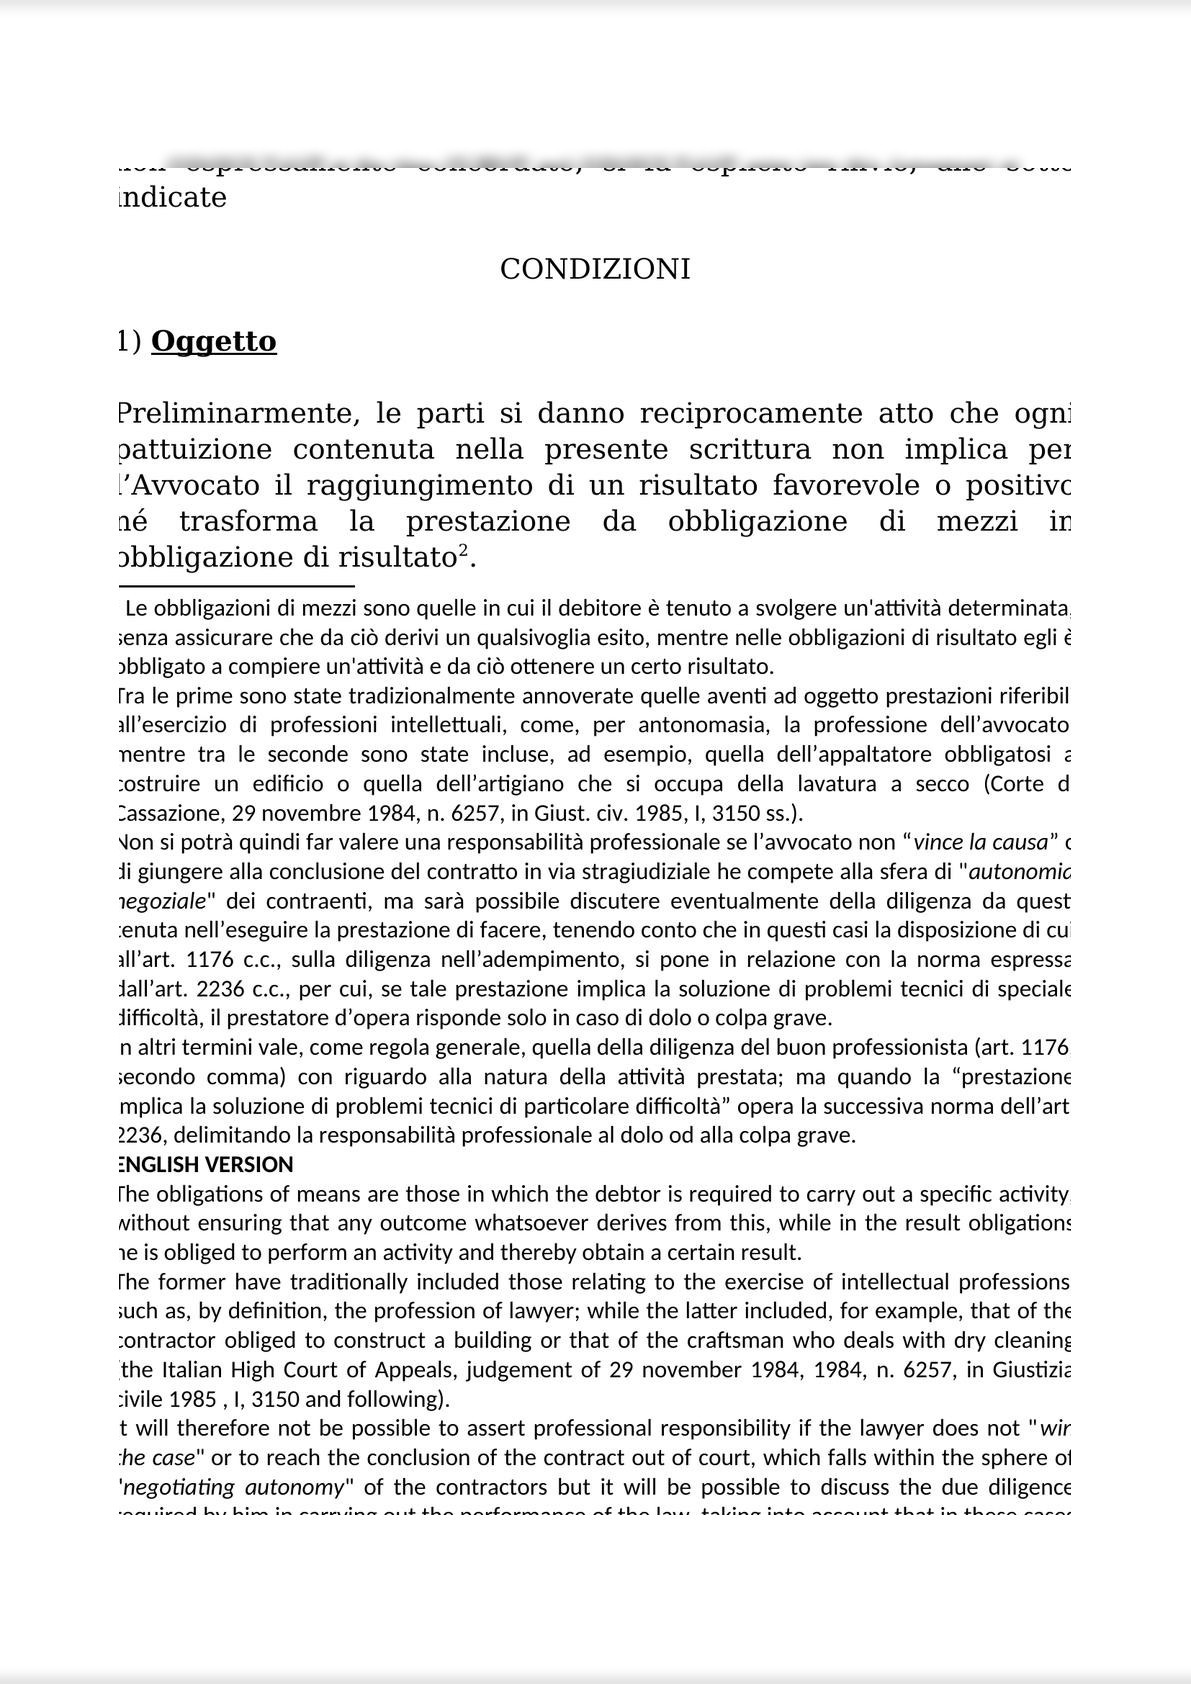 INTELLECTUAL WORK AGREEMENT FOR OUT-OF-COURT ACTIVITIES AND ATTACHMENTS 1 (PRIVACY); 2 (ANTI-MONEY LAUNDERING); AND 3 FEE QUOTE / CONTRATTO D’OPERA INTELLETTUALE STRAGIUDIZIALE-1